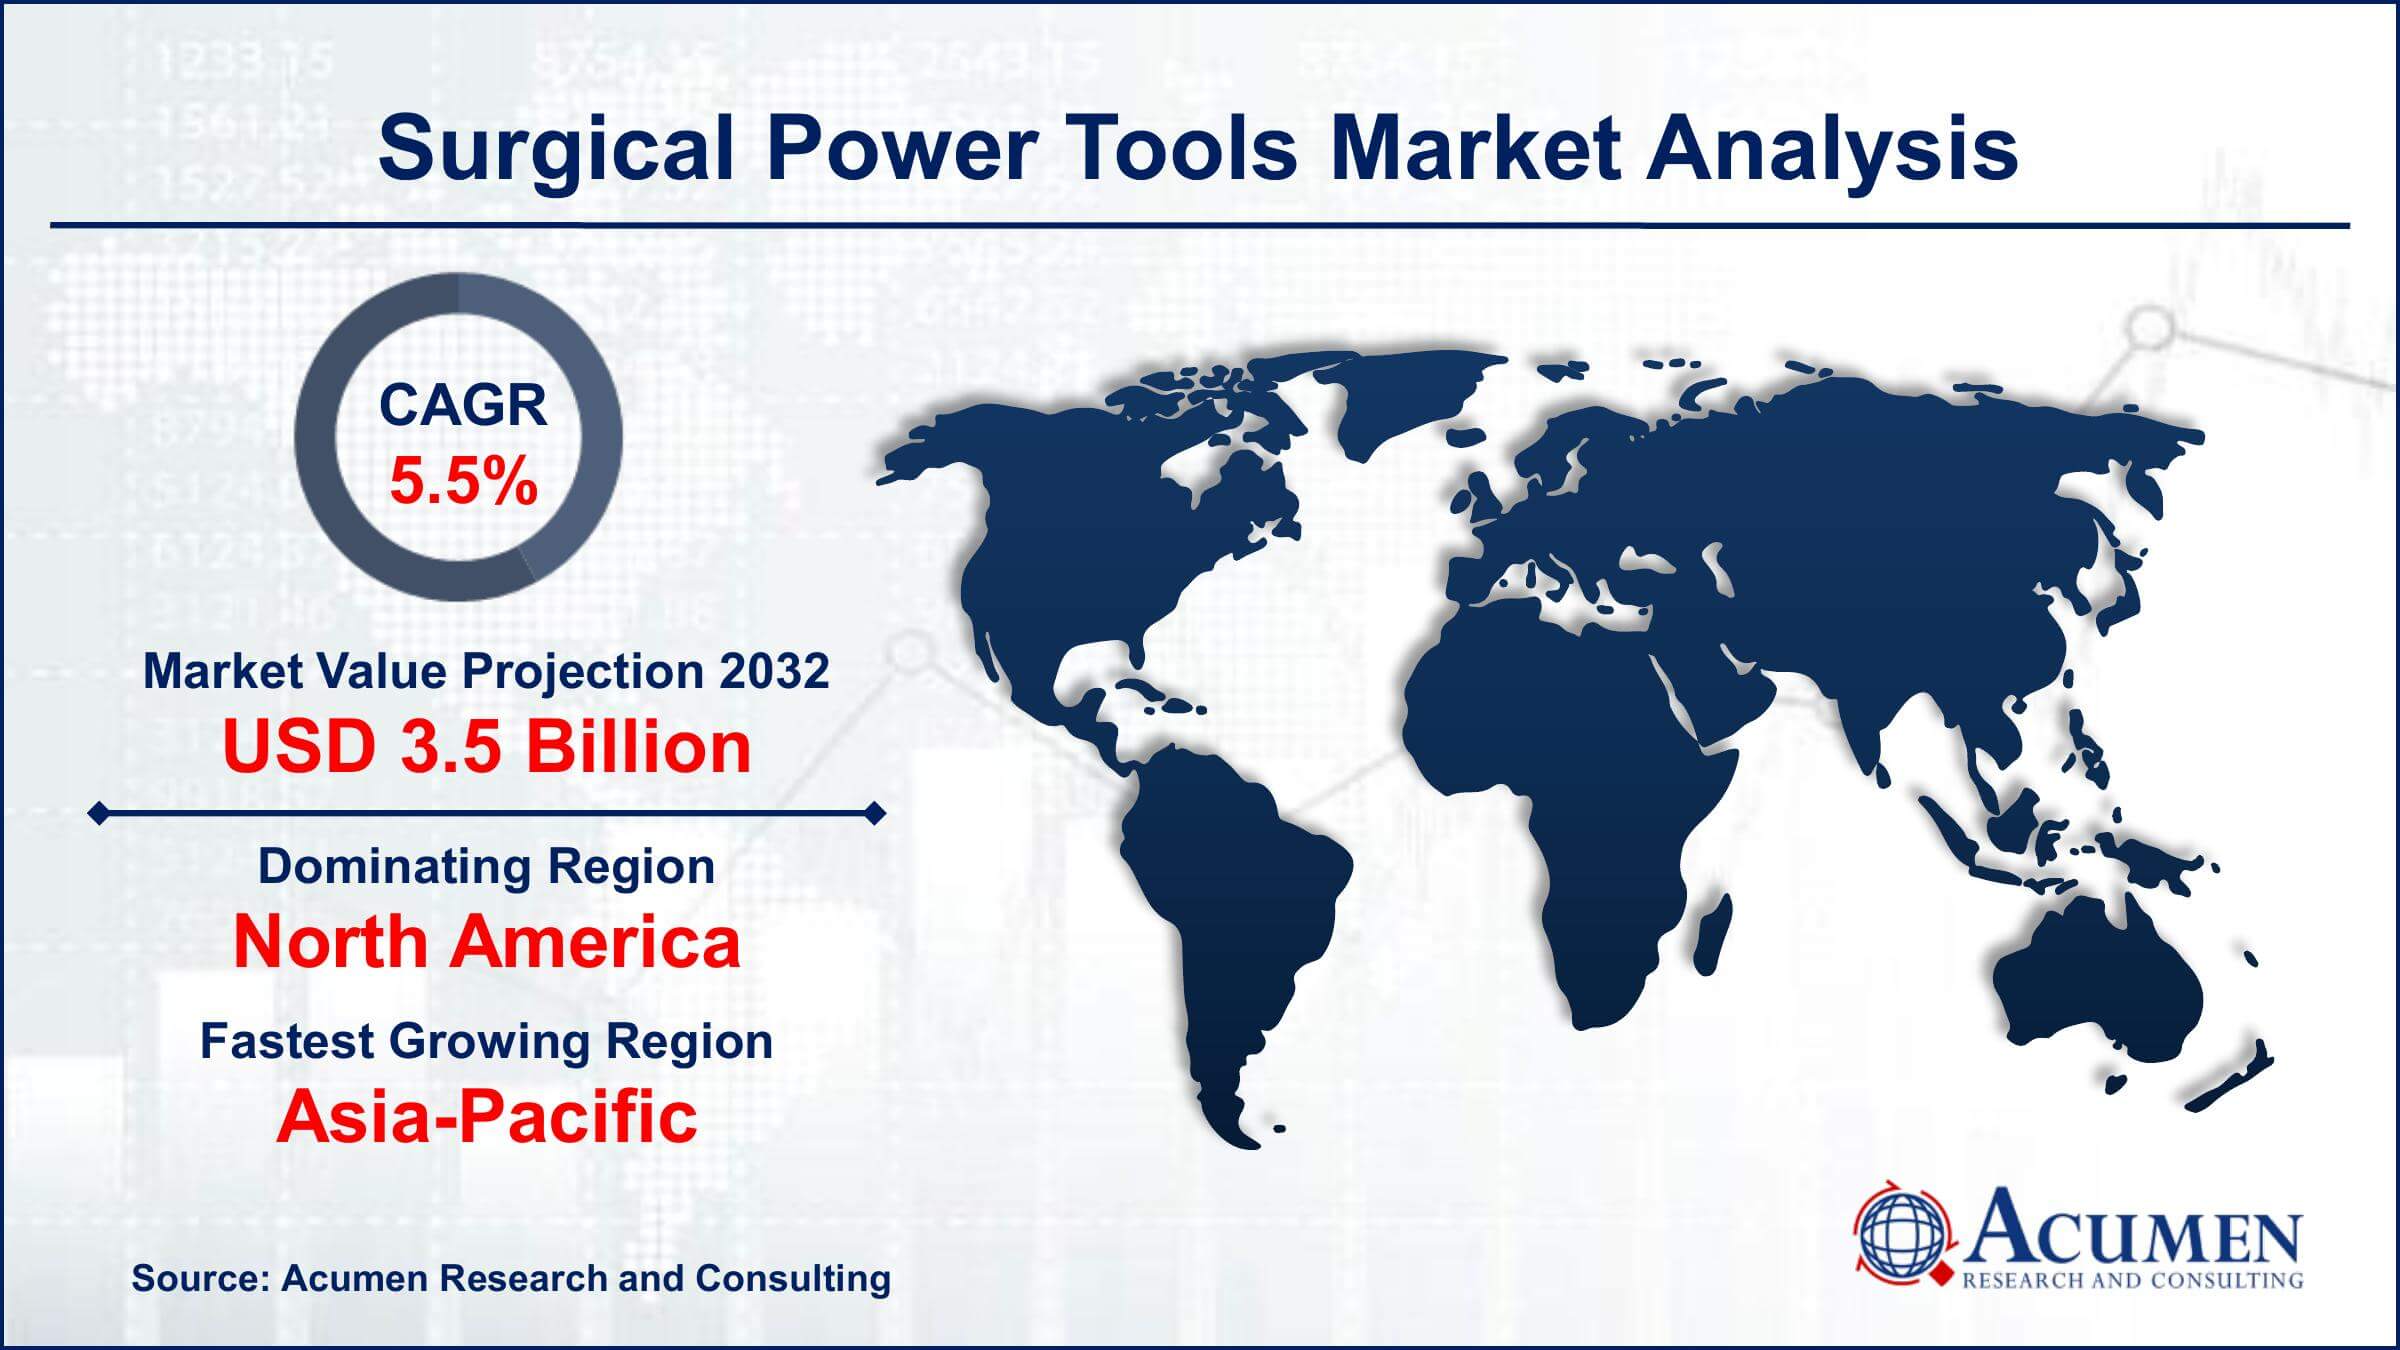 Global Surgical Power Tools Market Trends